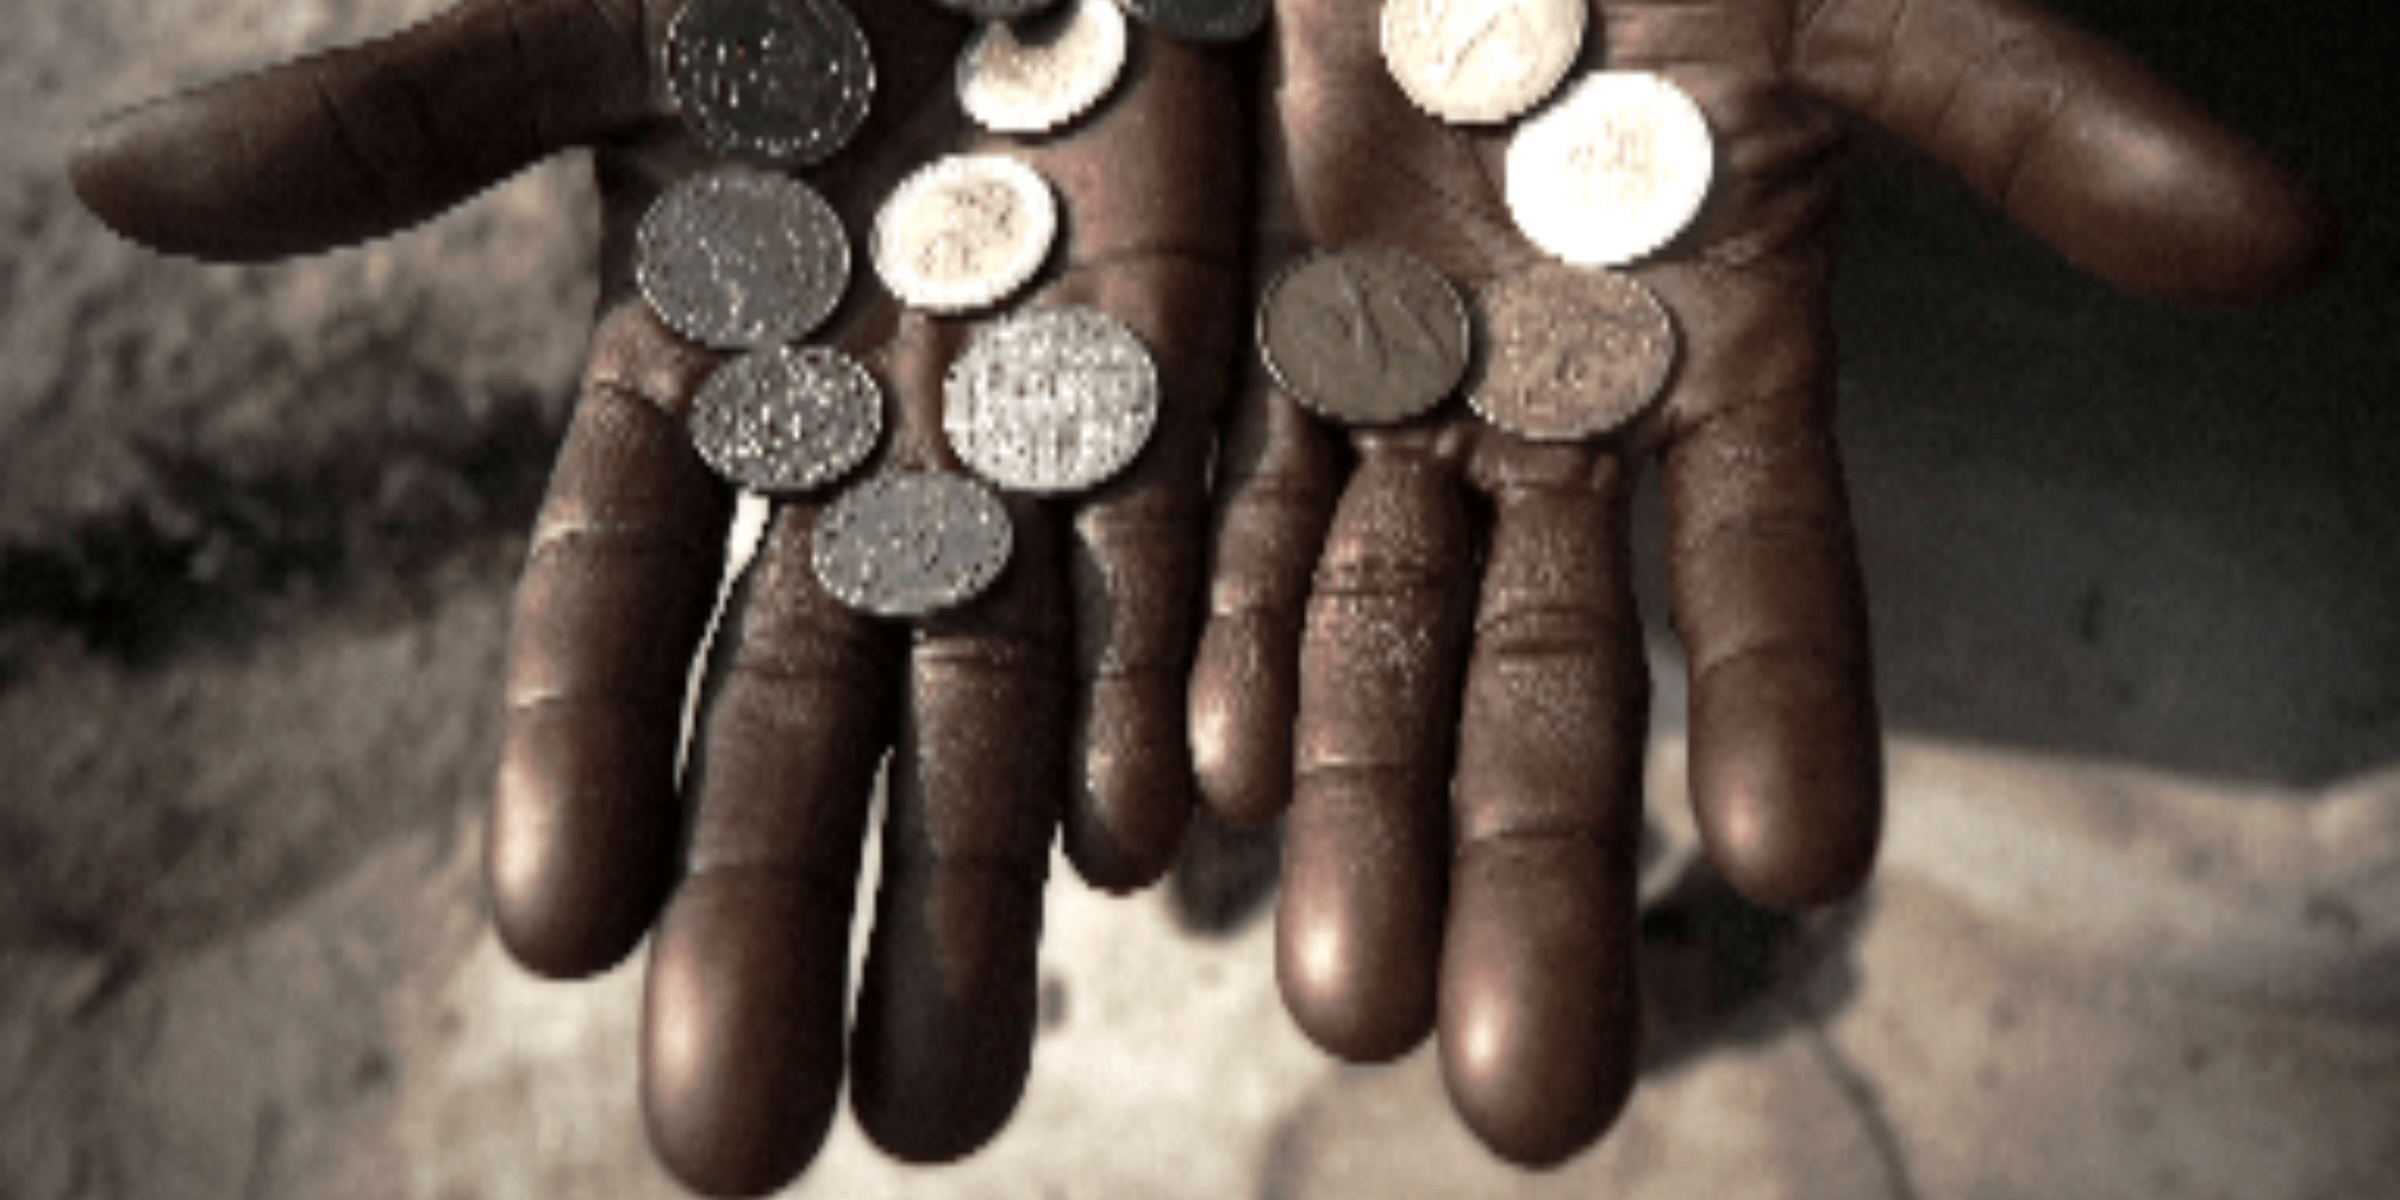 How to alleviate poverty in Nigeria | Make Nigeria great again